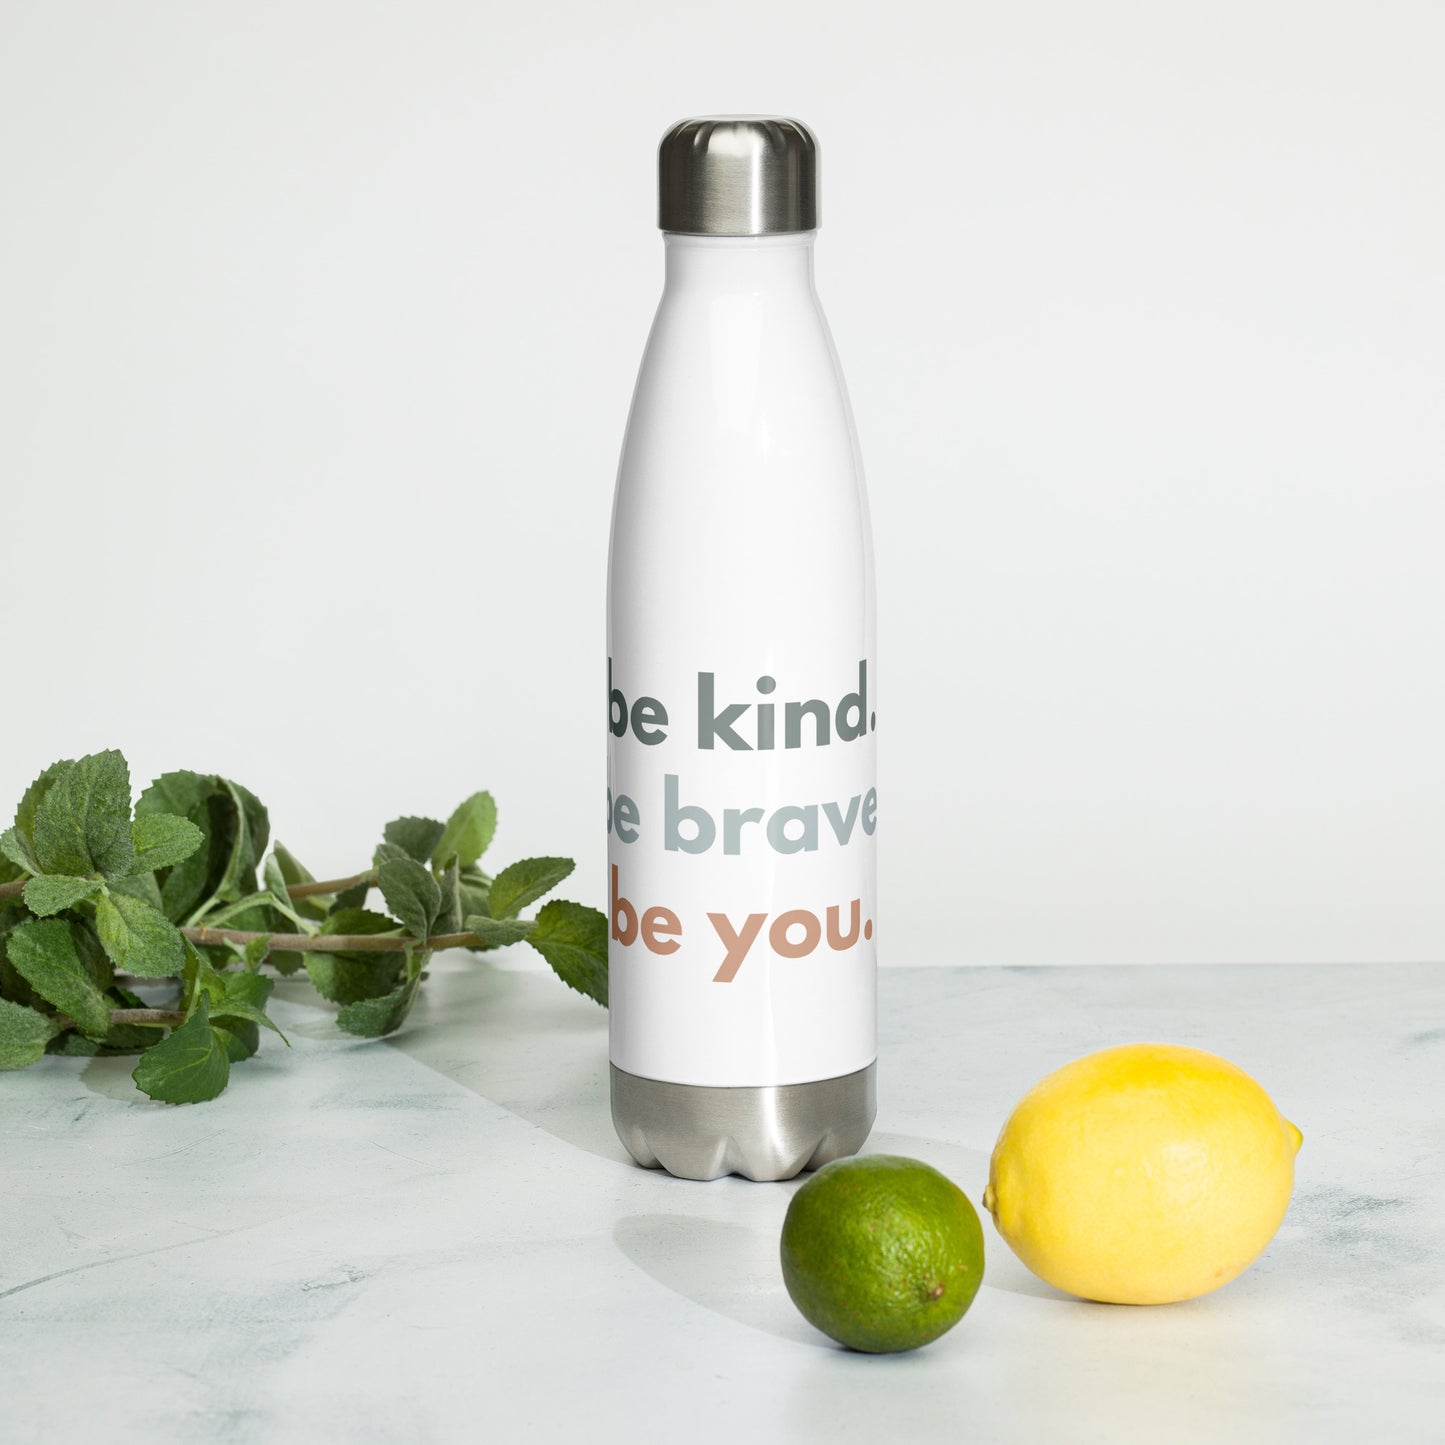 Stainless Steel Water Bottle - be kind. be brave. be you.